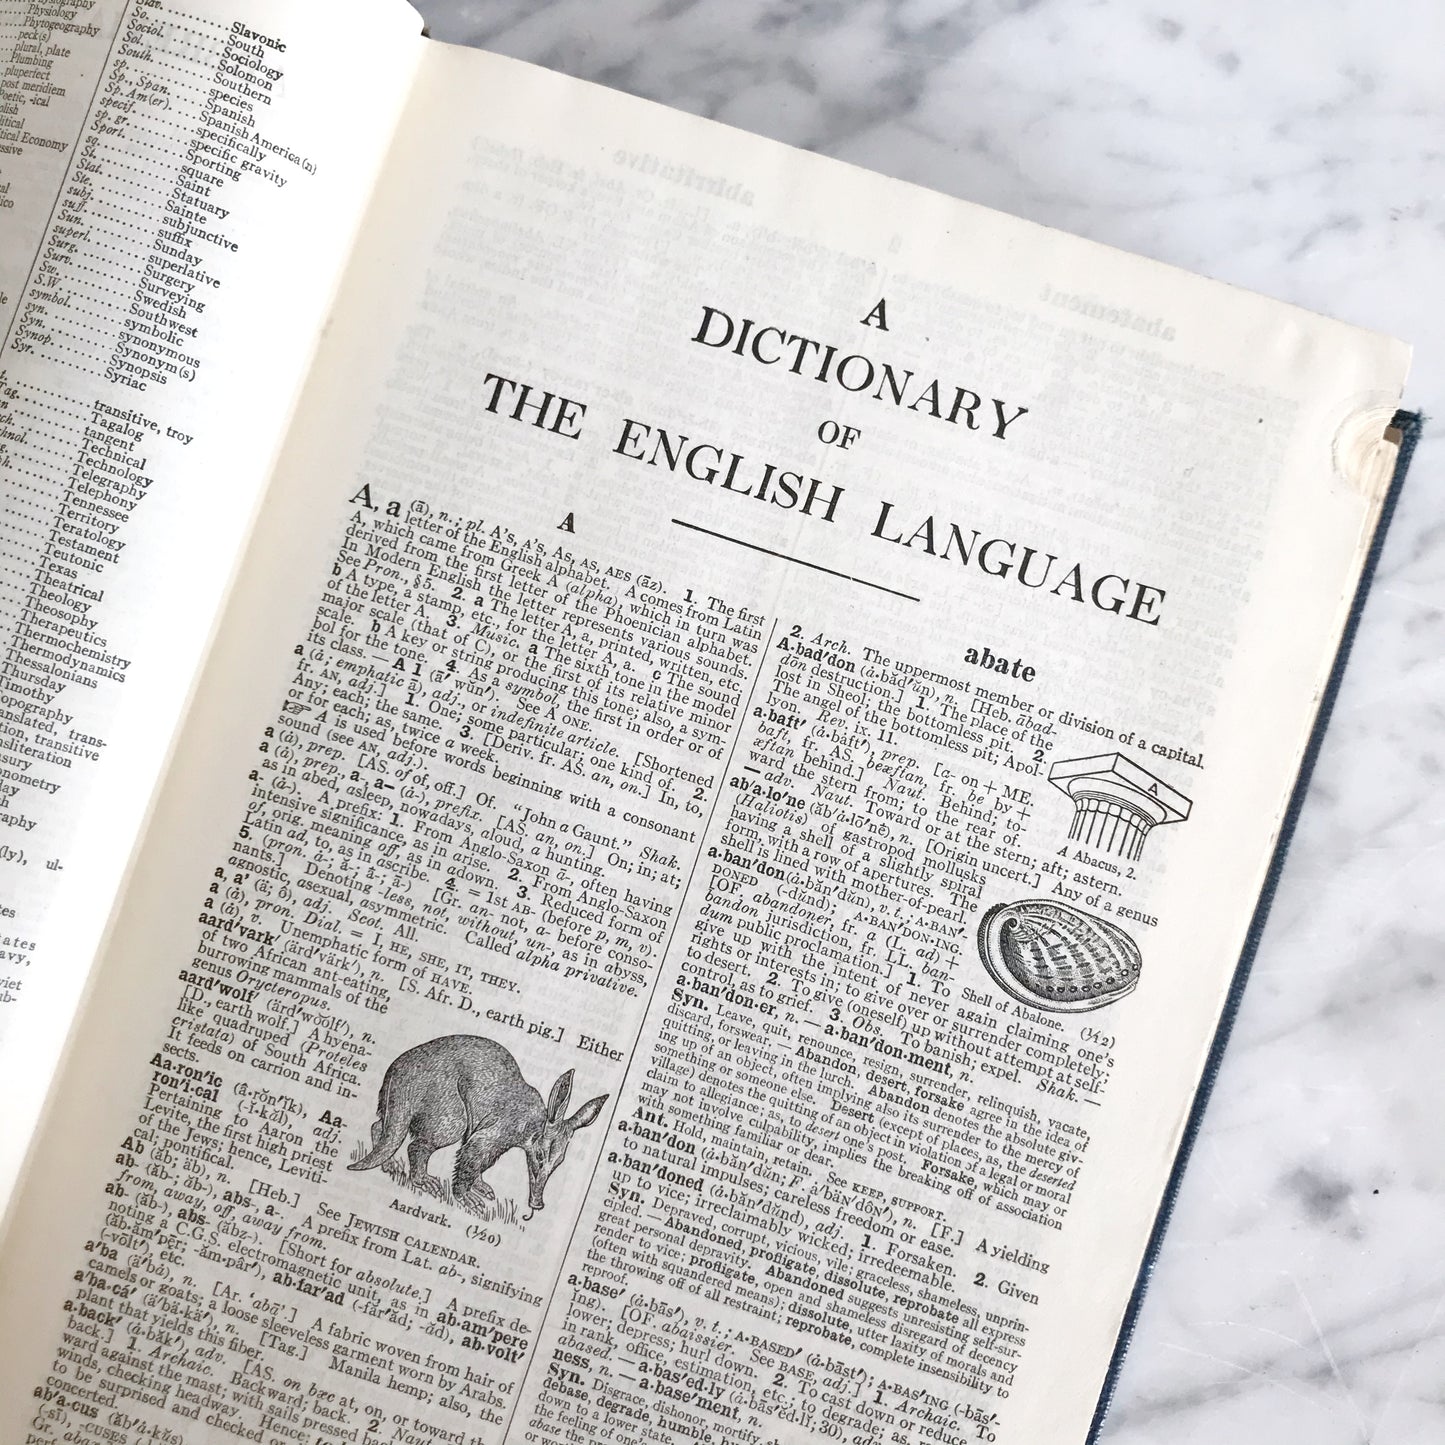 Book: 1936 Webster's Collegiate Dictionary